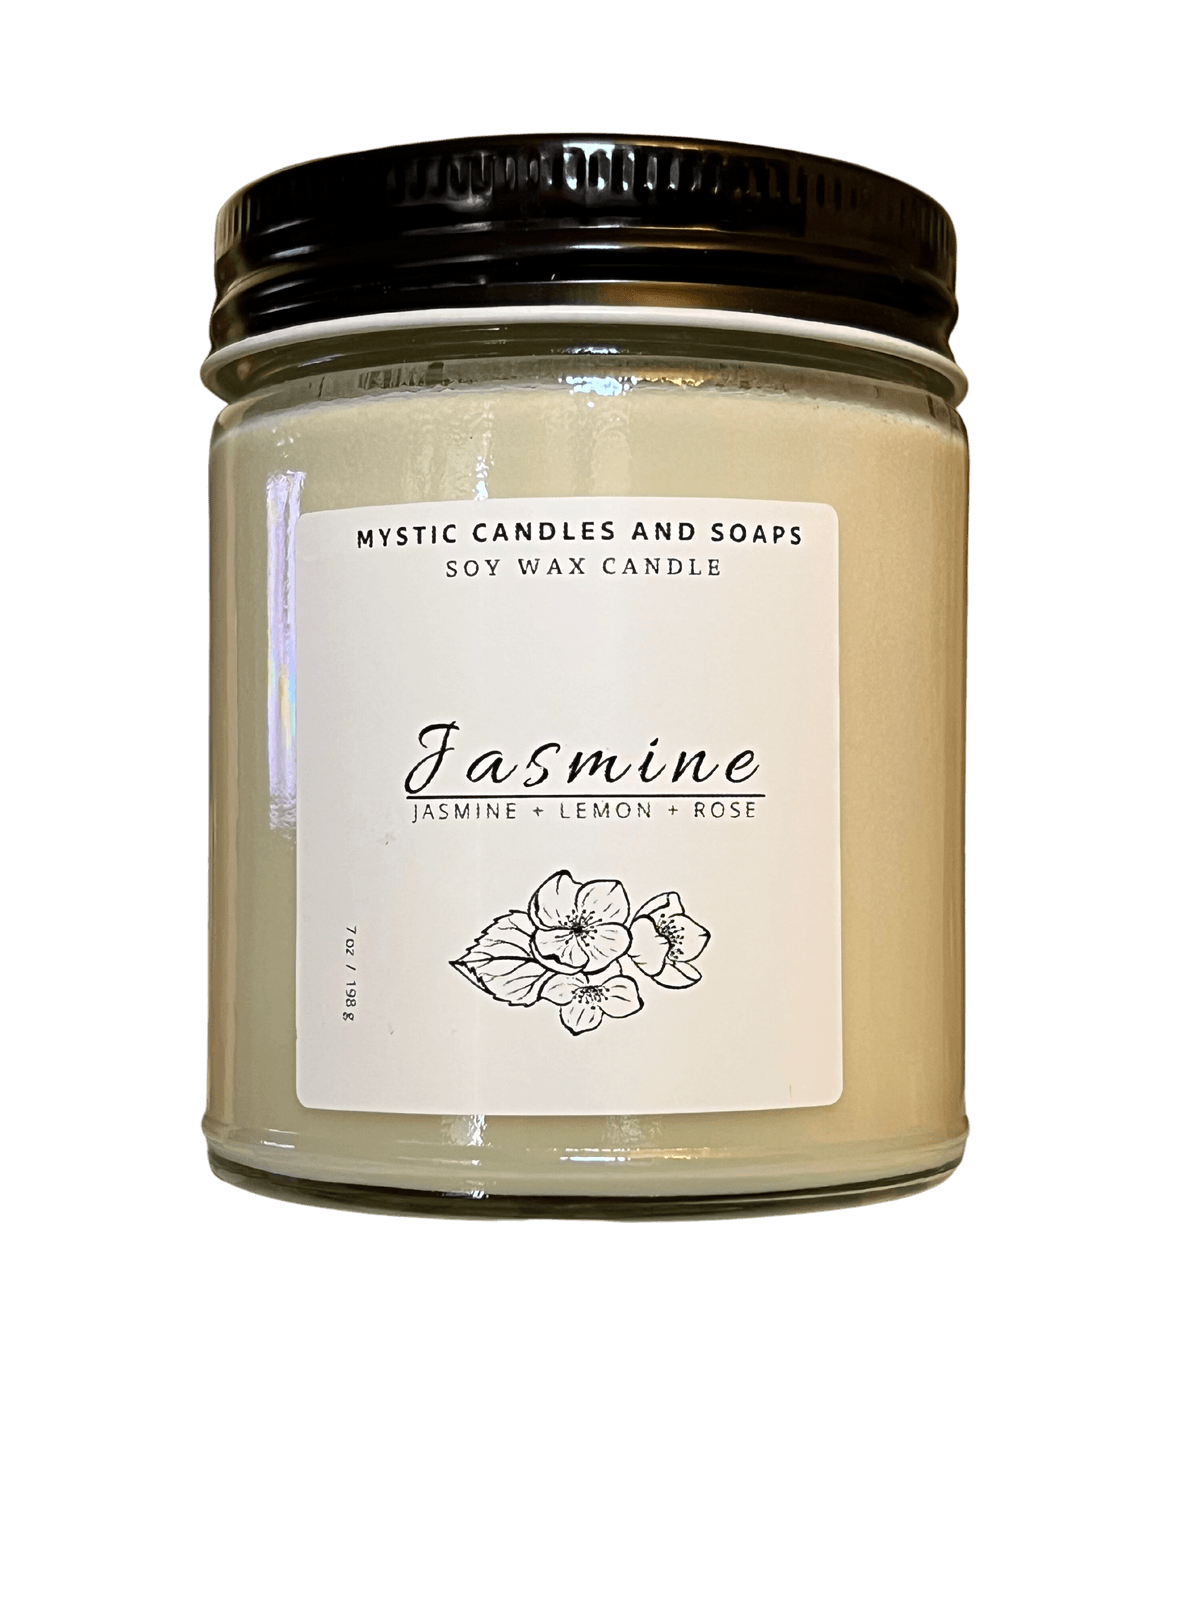 Jasmine Candle - Mystic Candles and Soaps LLC